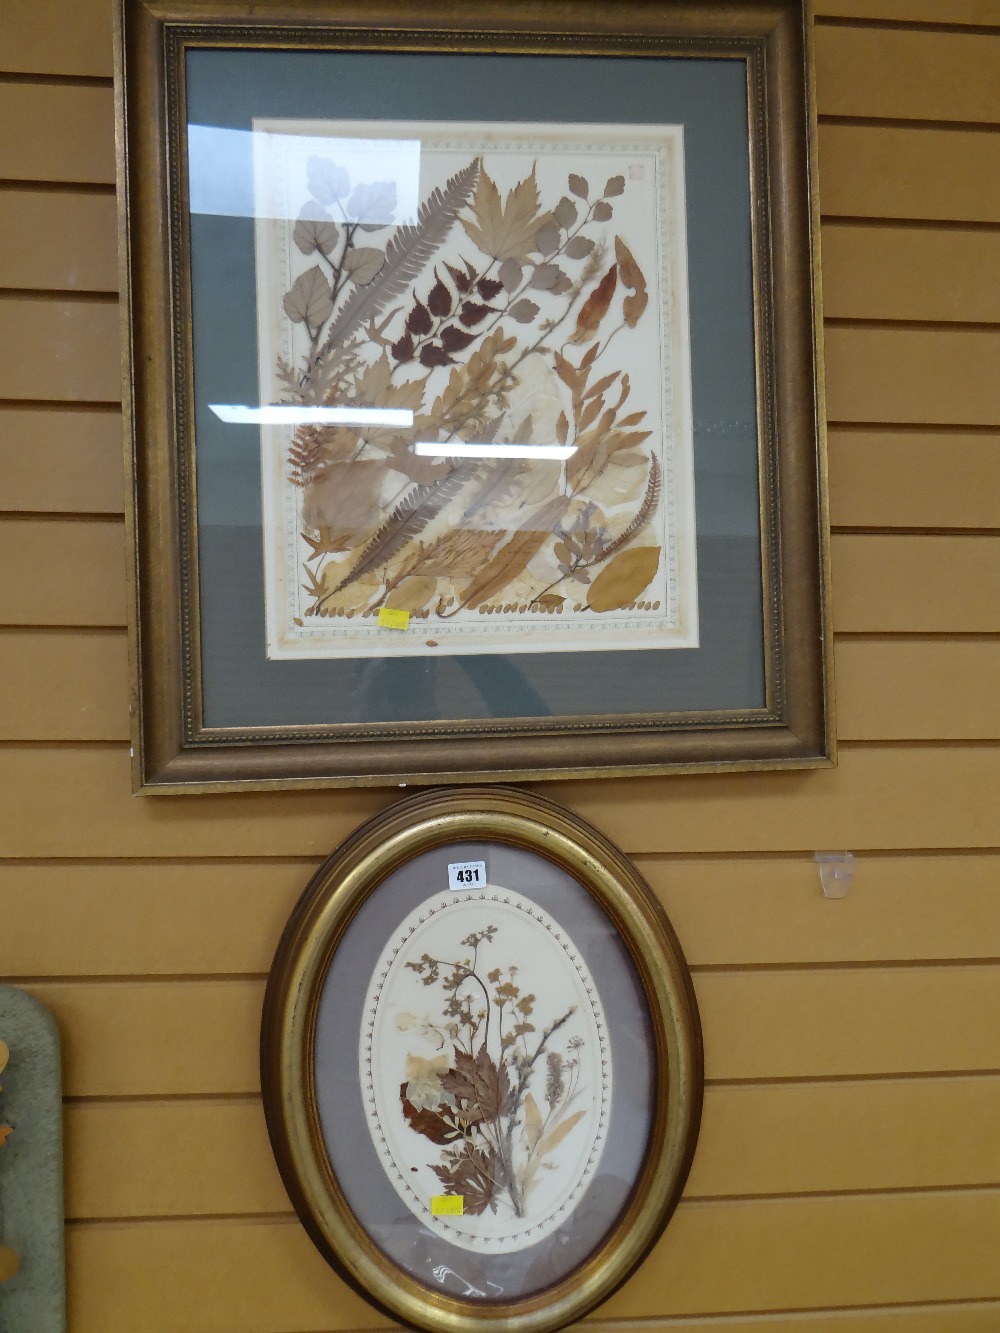 Two framed naturalistic collages